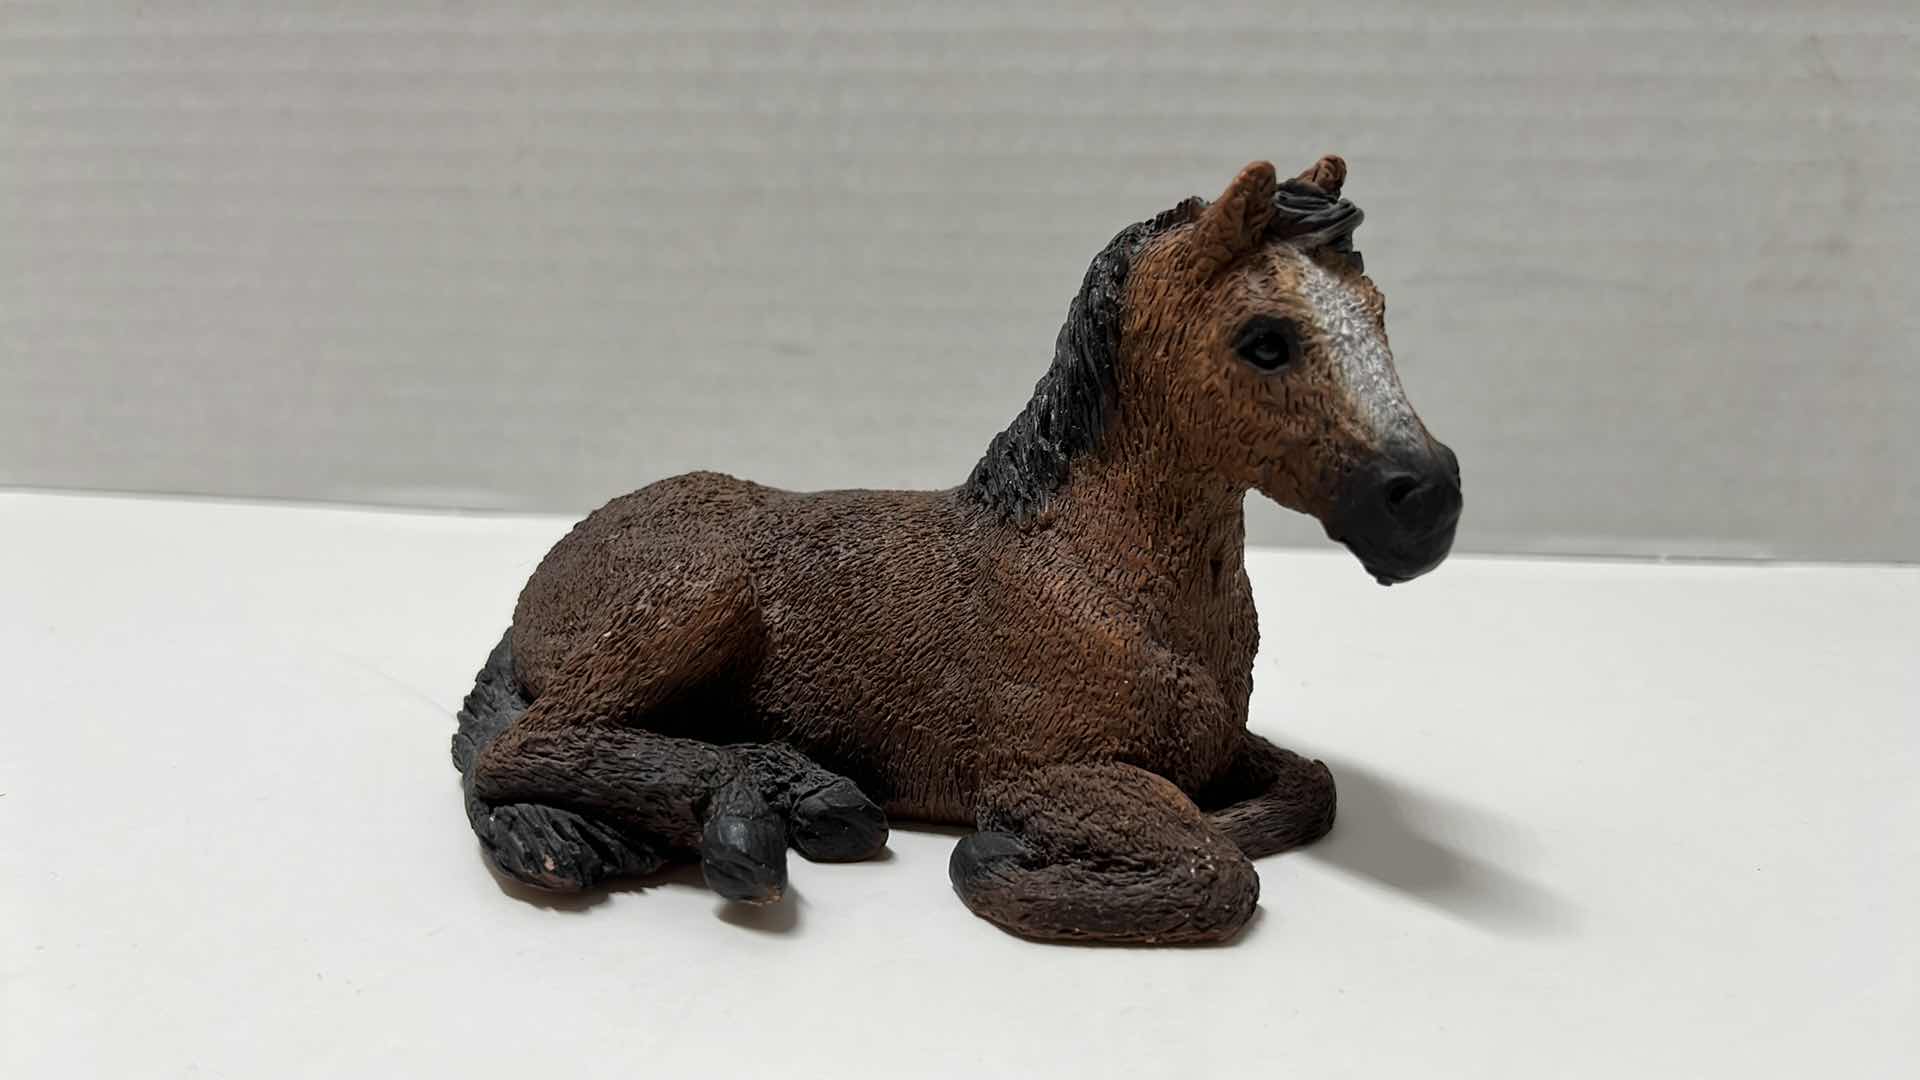 Photo 6 of CASTAGNA HORSE FIGURINE, 1988 MADE IN ITALY 2” X 7” H5” & STONE CRITTERS HORSE SORREL SC-410 FIGURINE (2)